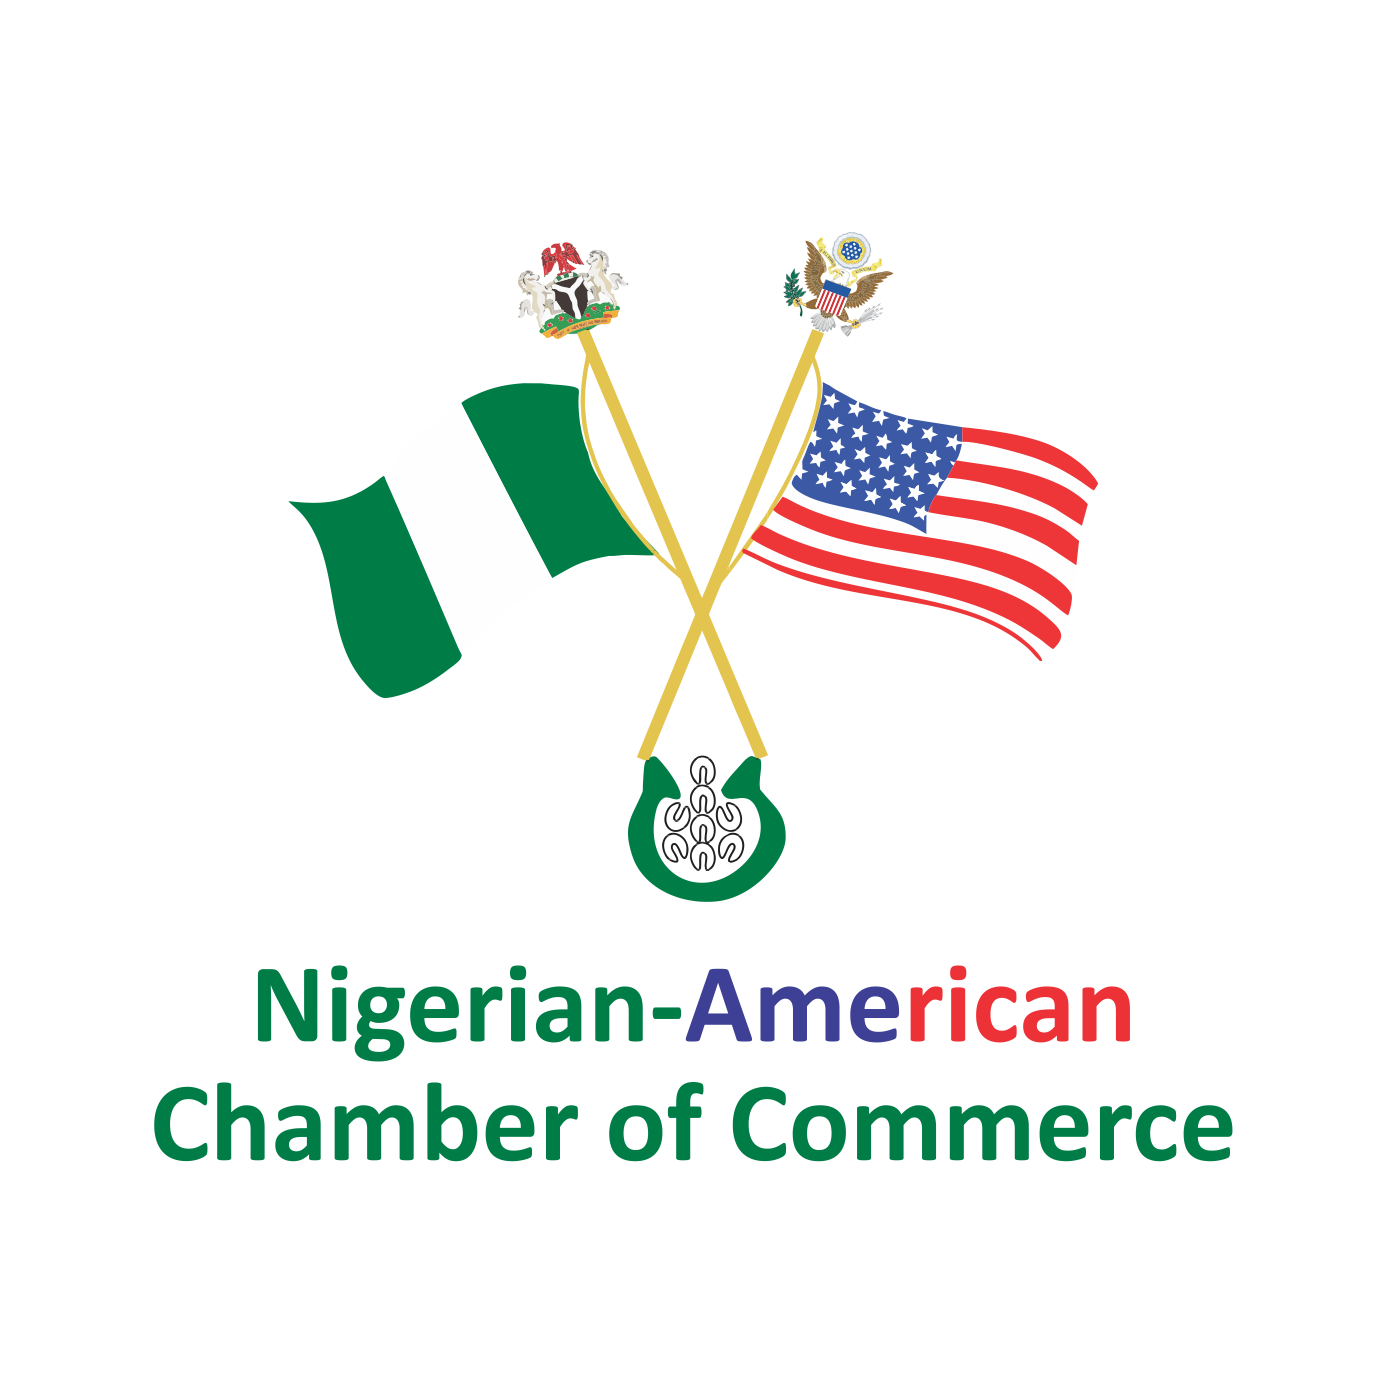 Chamber seeks increased SMEs’ contribution to economy